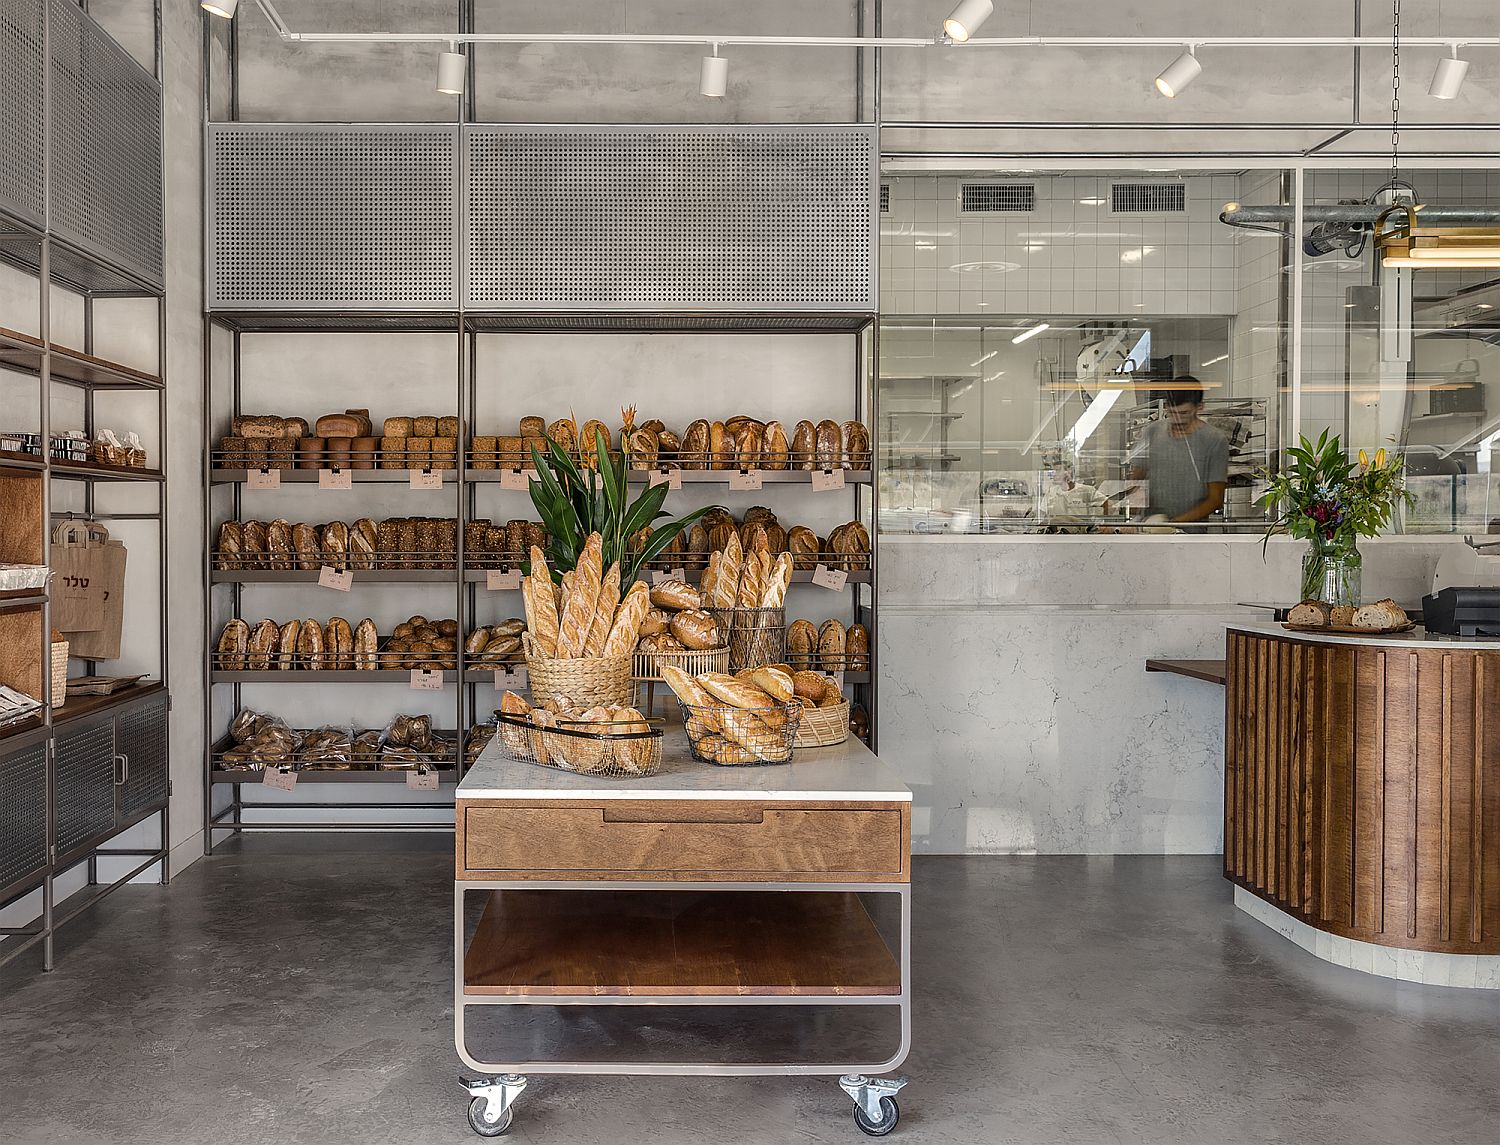 Revamped modern interior of Teller bakery and pastry factory in Israel